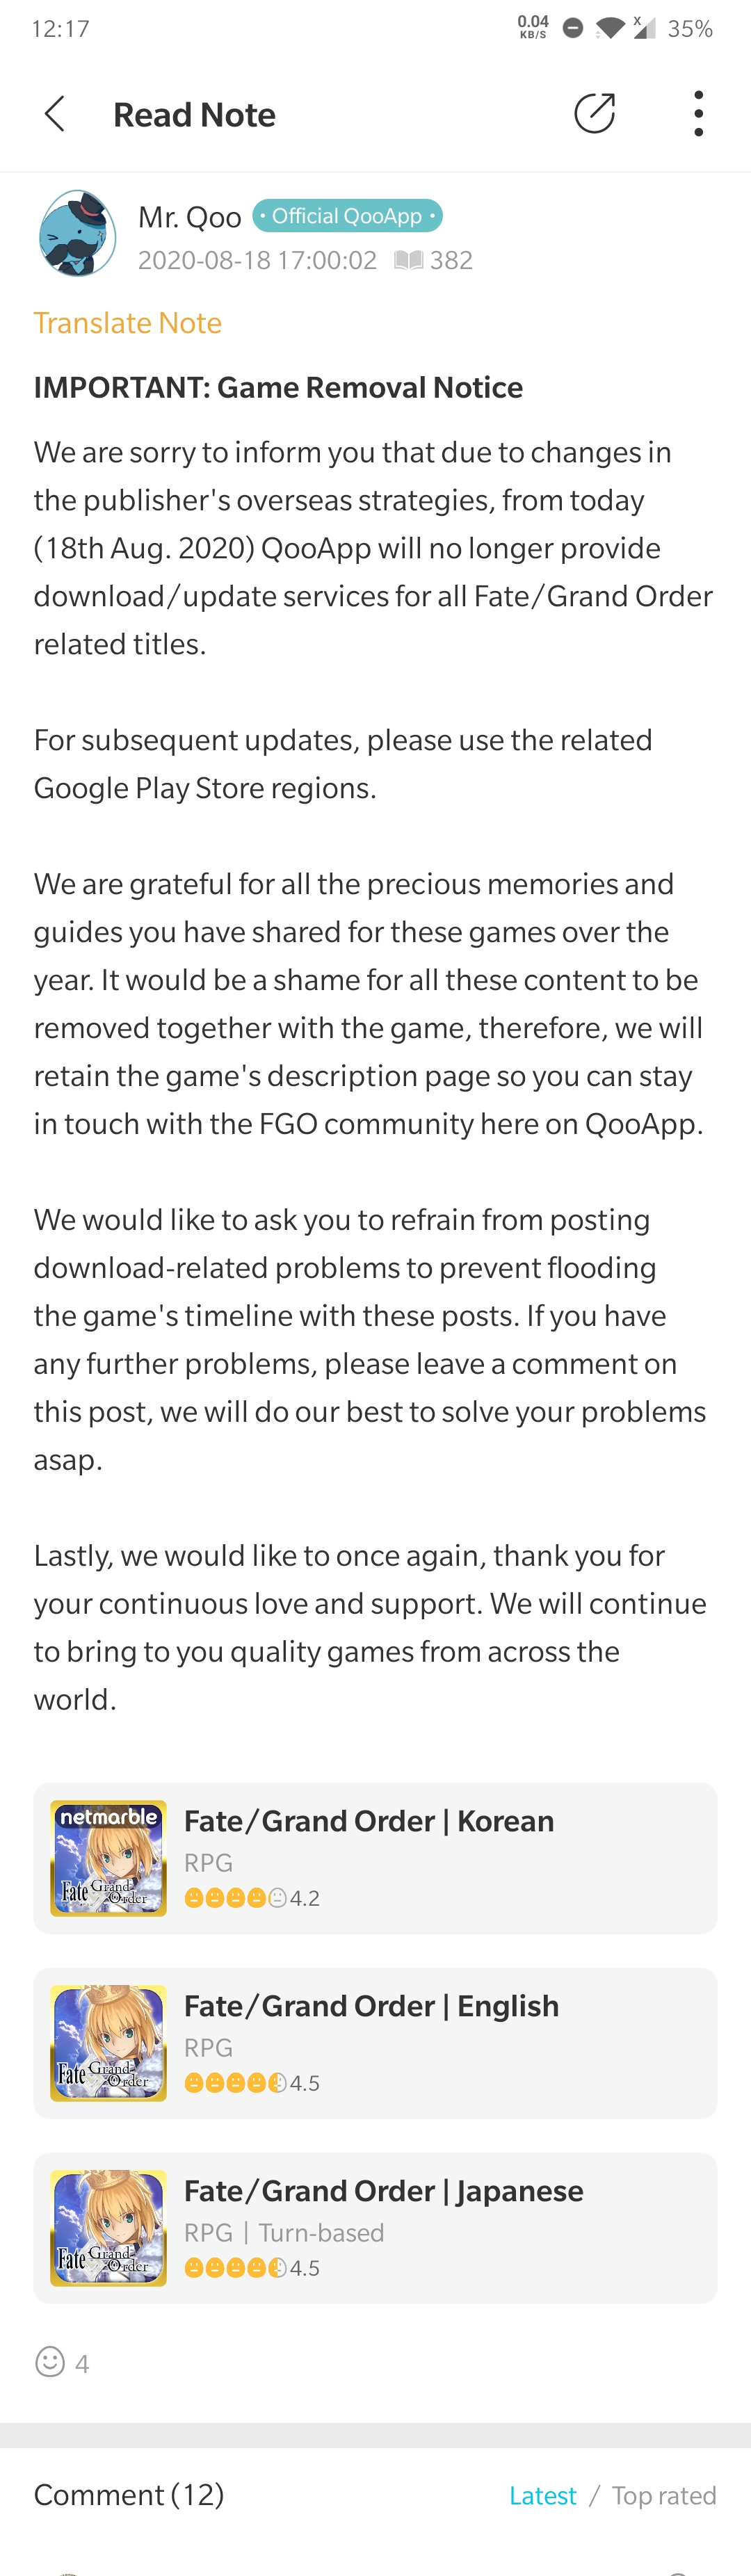 So Qooapp Removed Fgo From Their Store Fandom